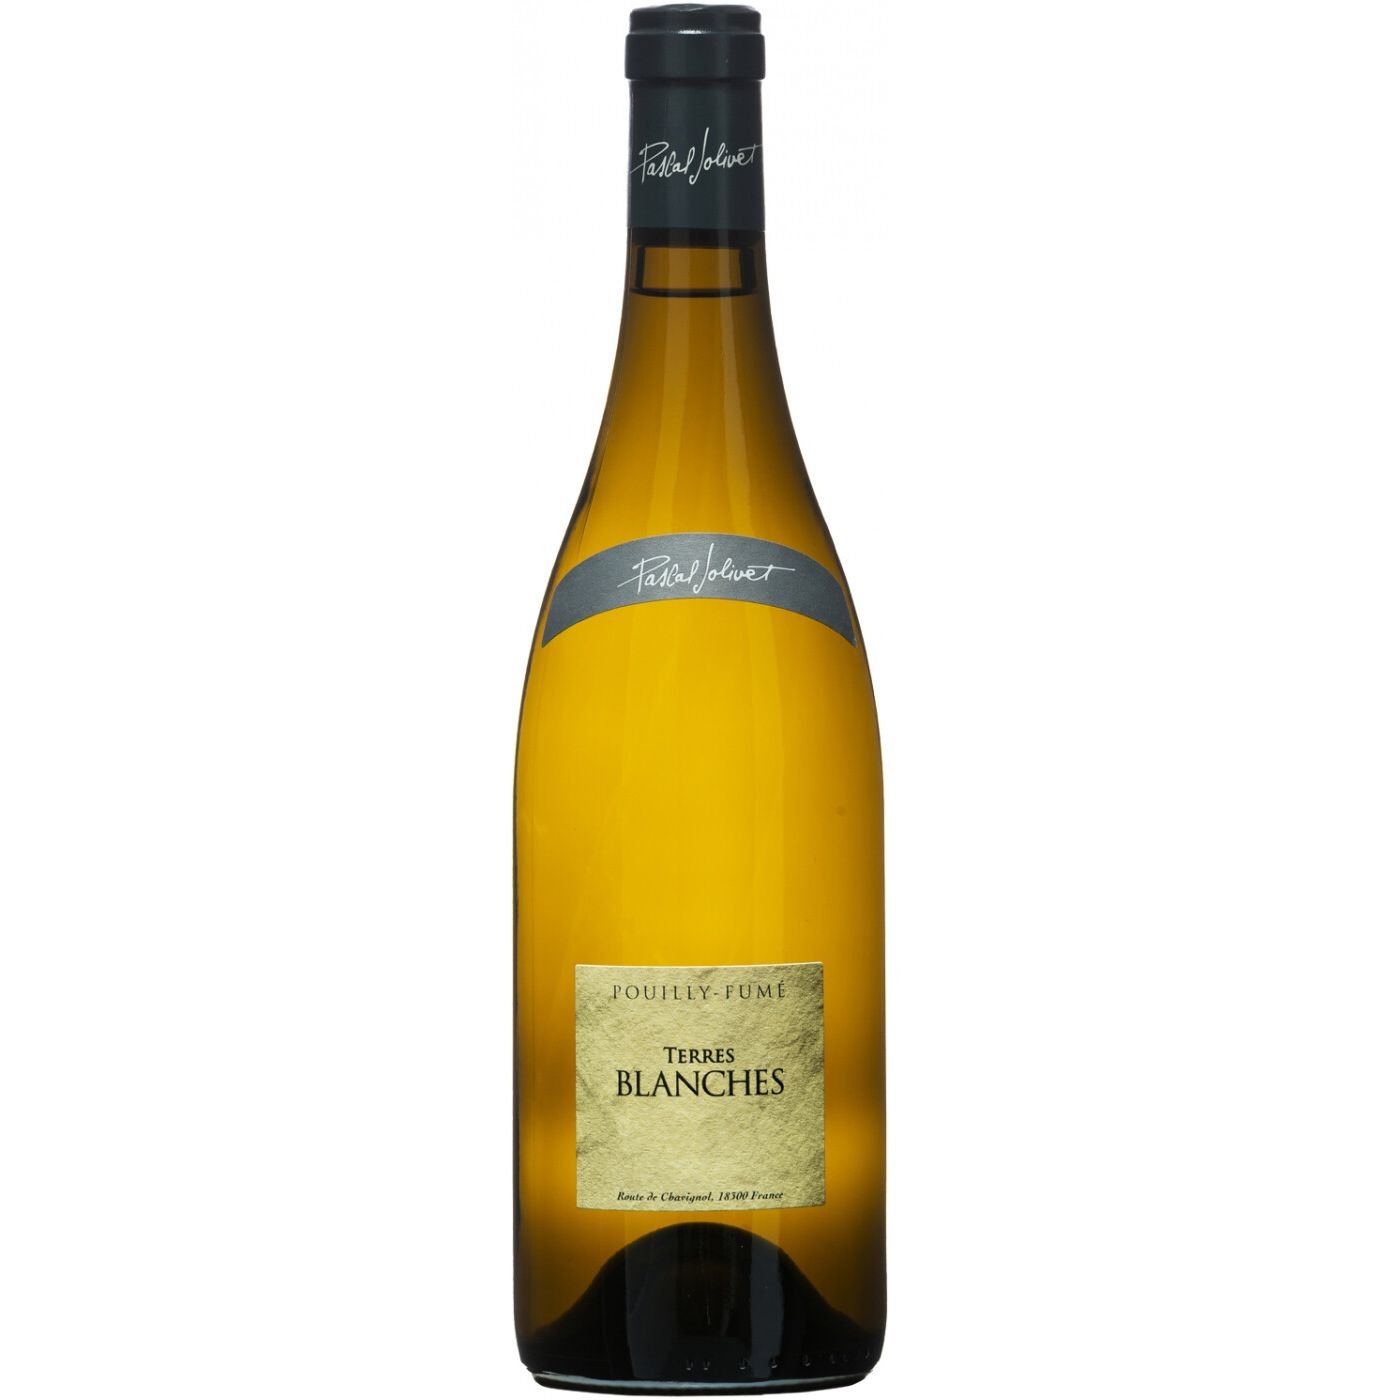 Вино Pascal Jolivet Pouilly-Fume Terres Blanches, біле, сухе, 13,5%, 0,75 л (8000018516260) - фото 1